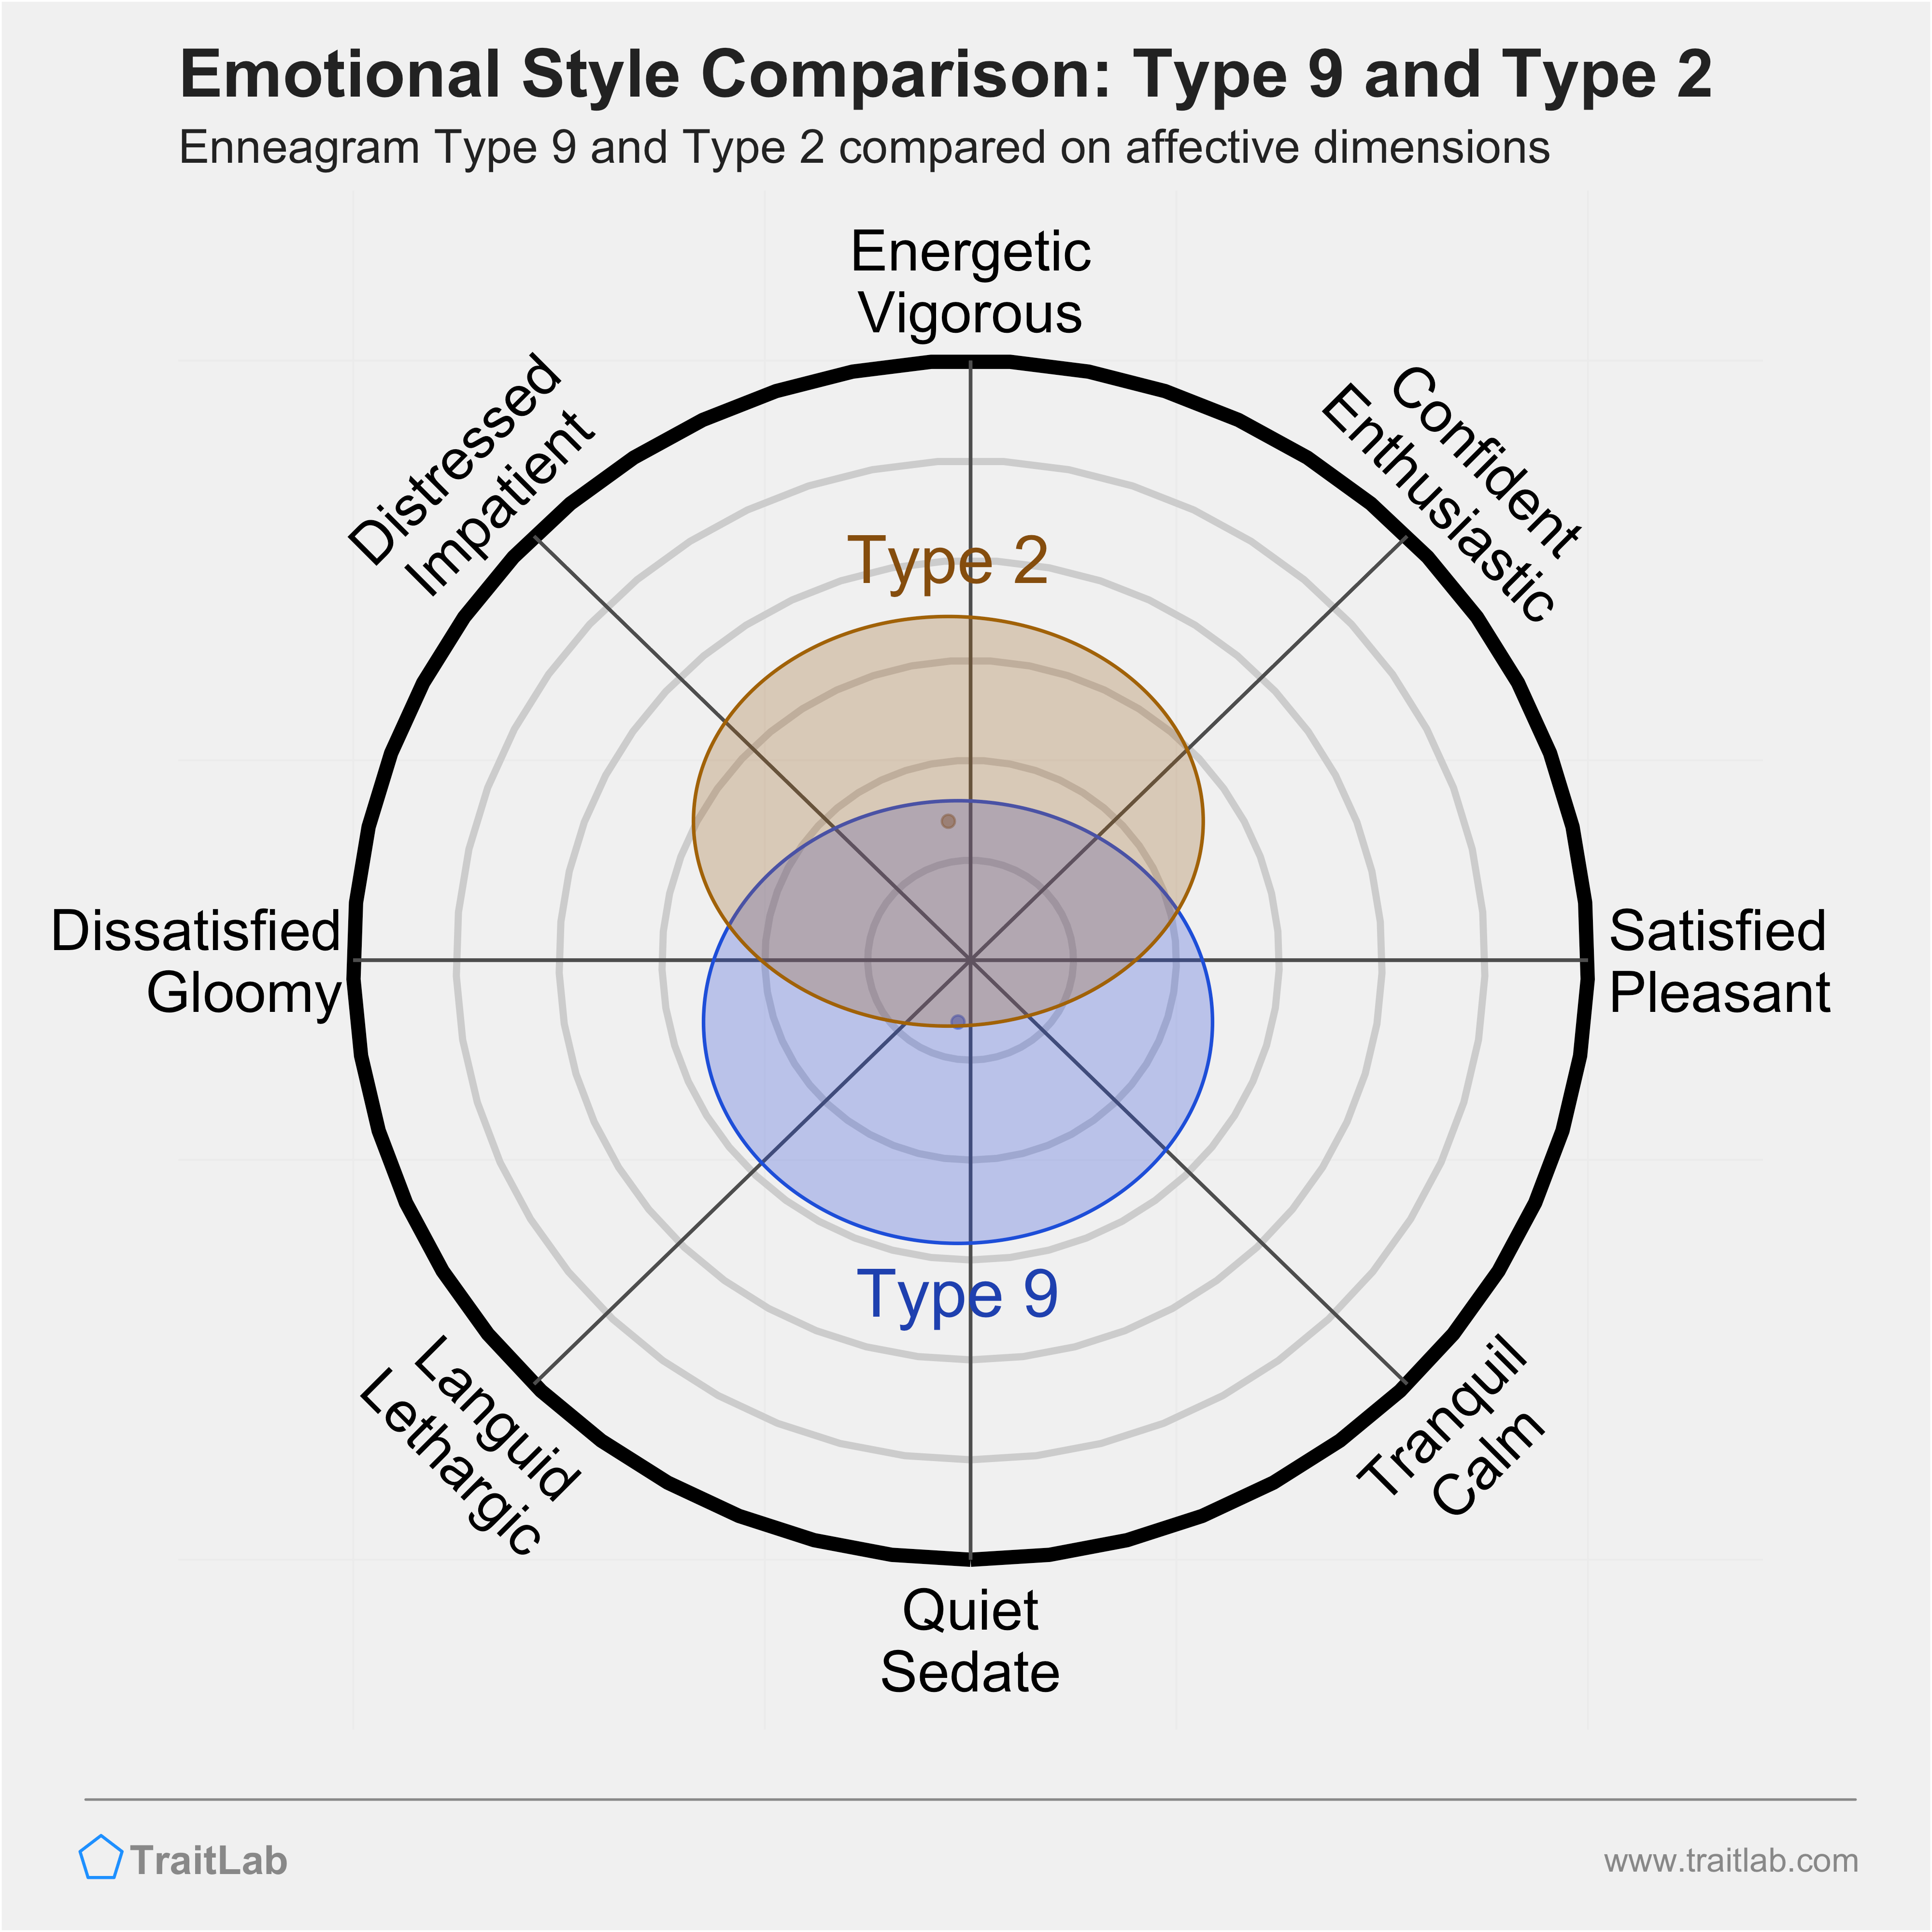 Type 9 and Type 2 comparison across emotional (affective) dimensions